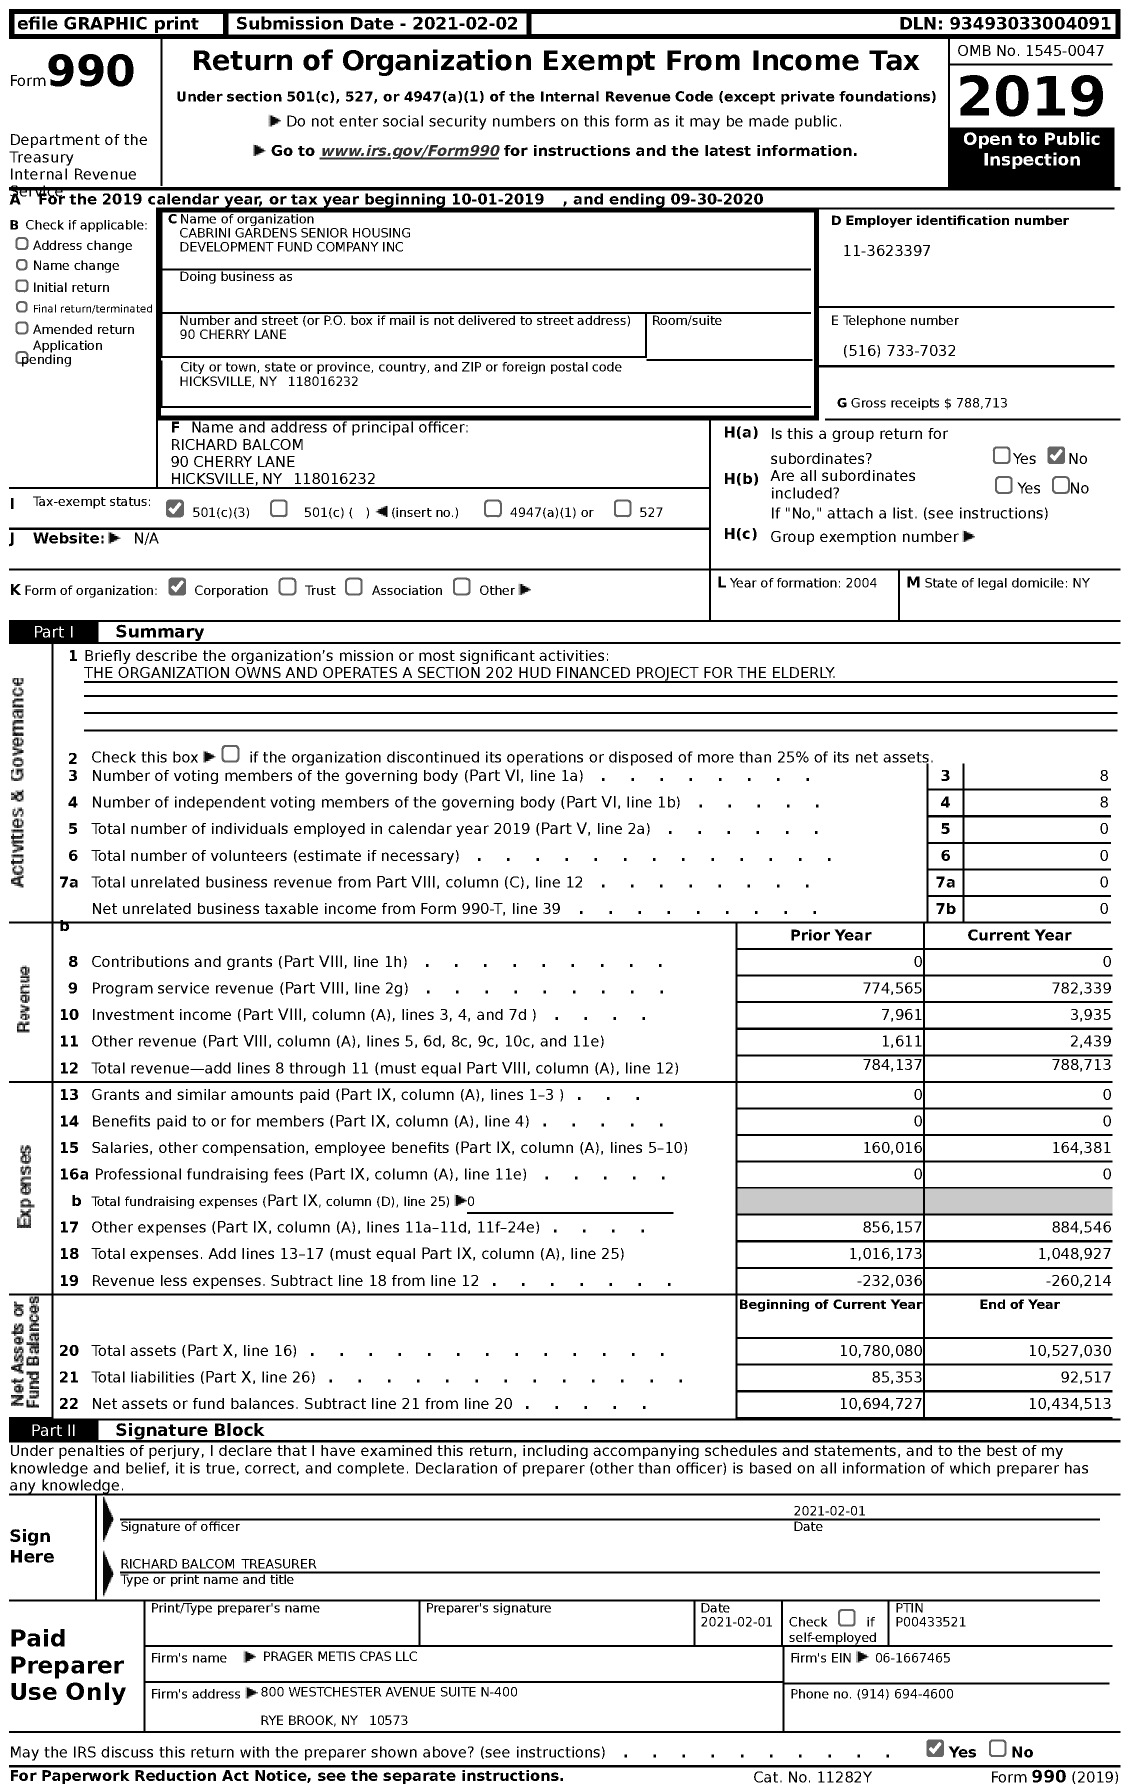 Image of first page of 2019 Form 990 for Cabrini Gardens Senior Housing Development Fund Company